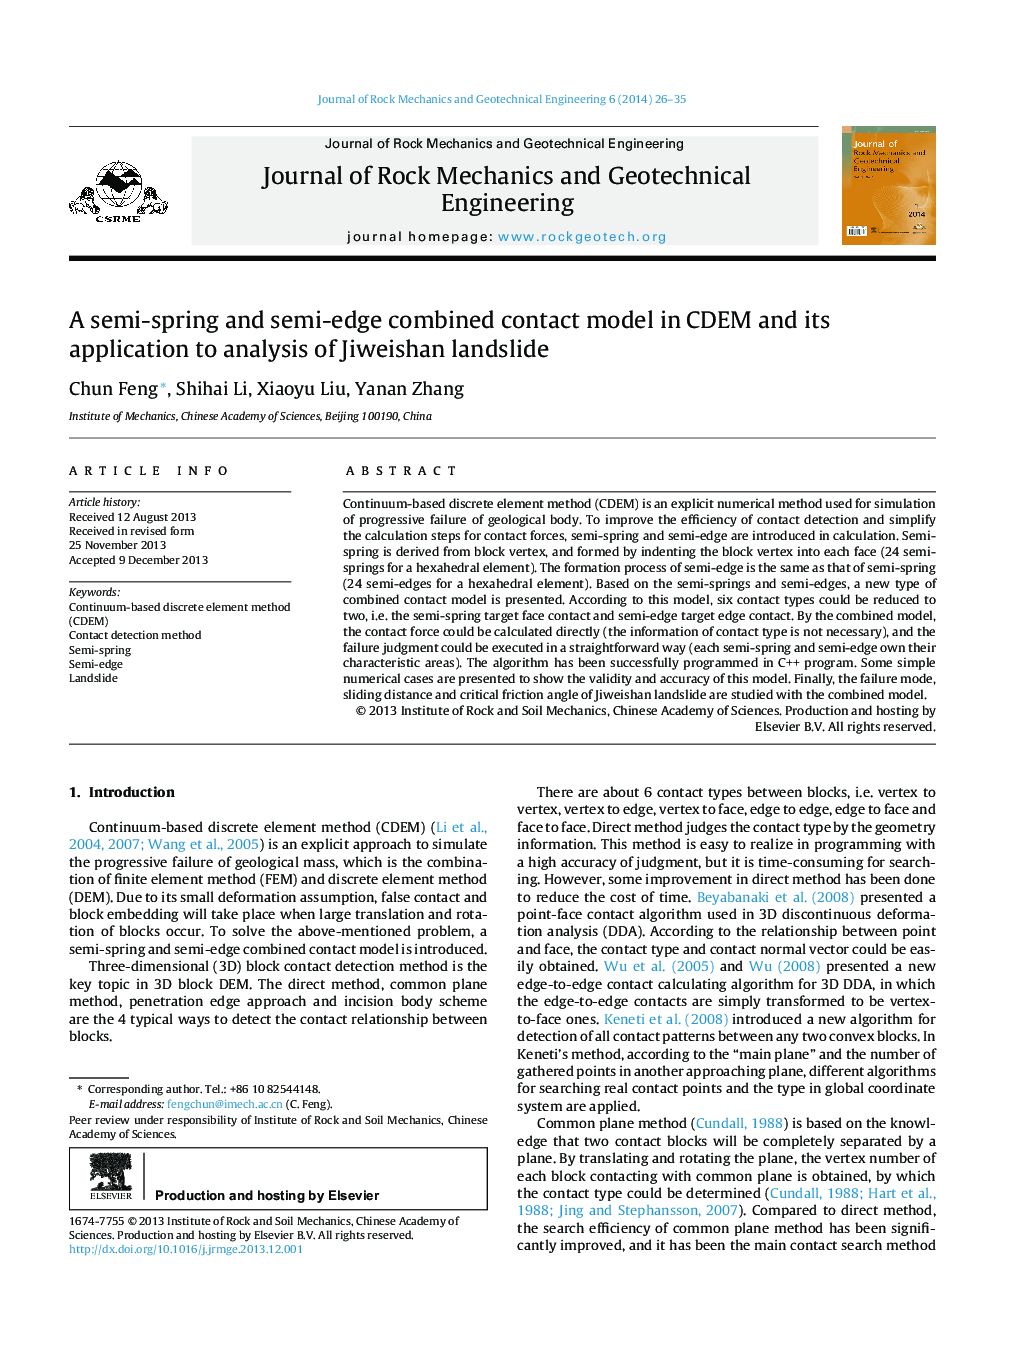 A semi-spring and semi-edge combined contact model in CDEM and its application to analysis of Jiweishan landslide 